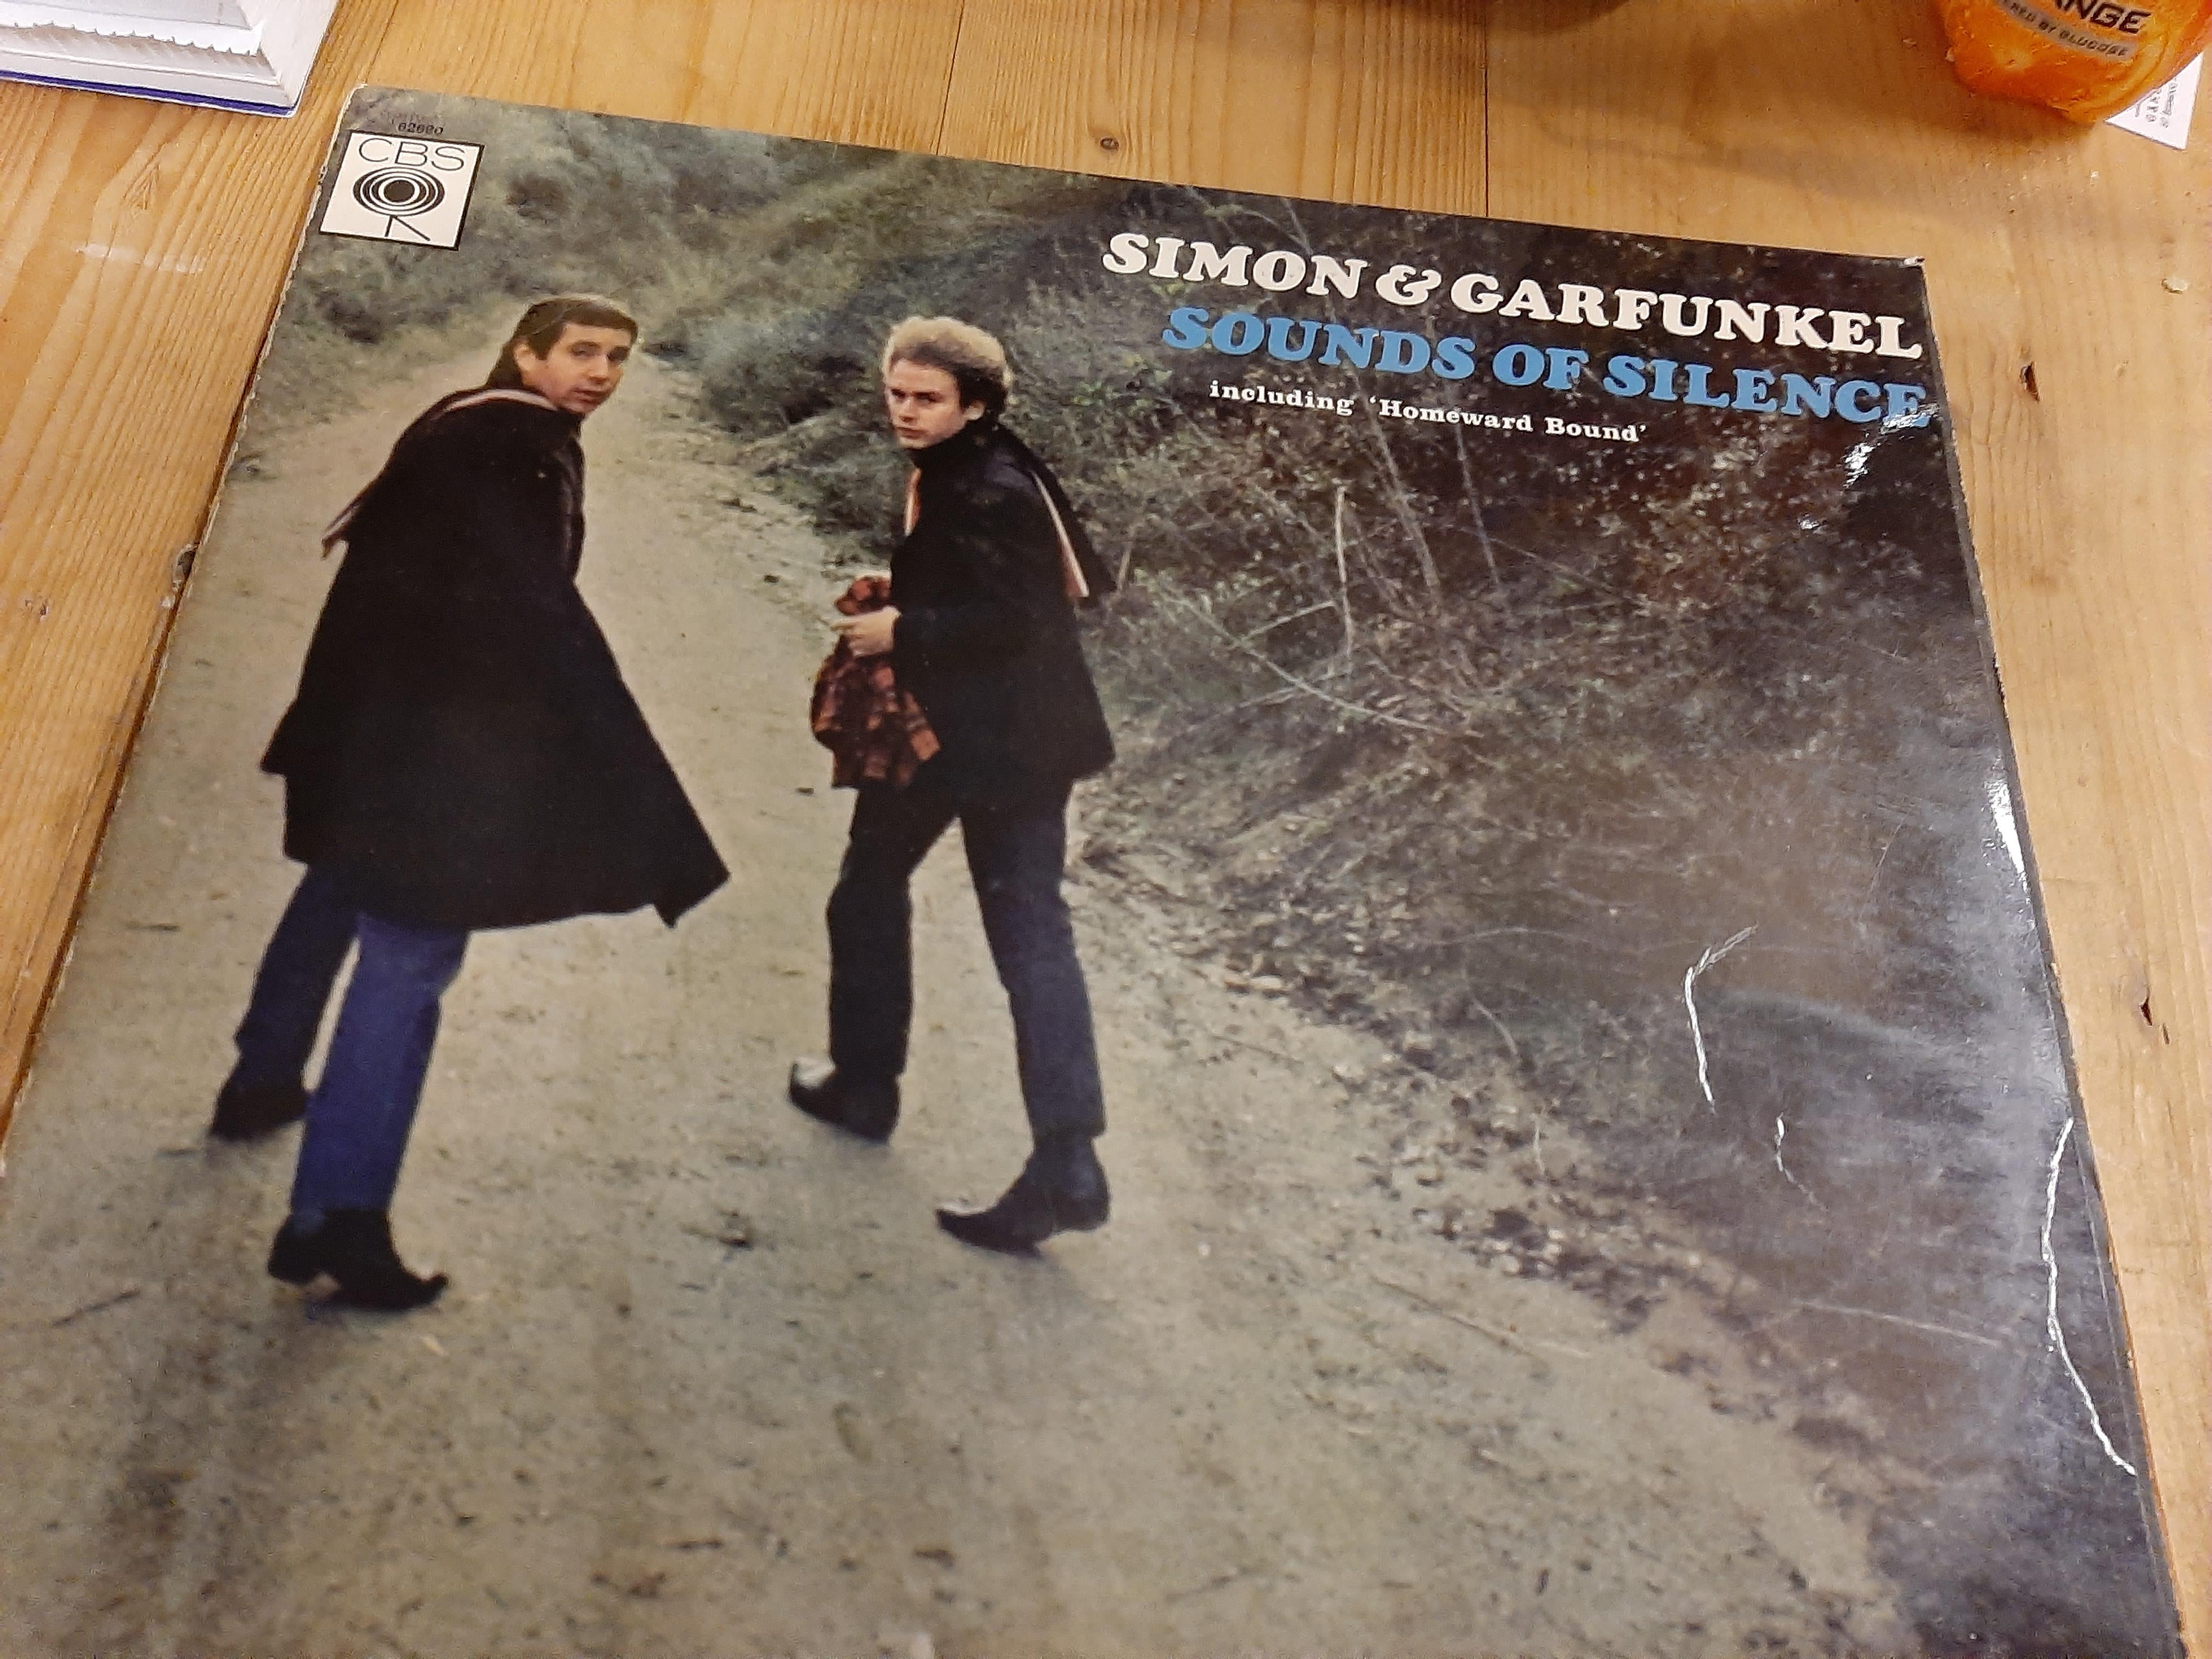 4 Vinyl Records: Simon & Garfunkel "Sounds of Silence" and "Bridge over Troubled Waters", t/w - Image 4 of 7